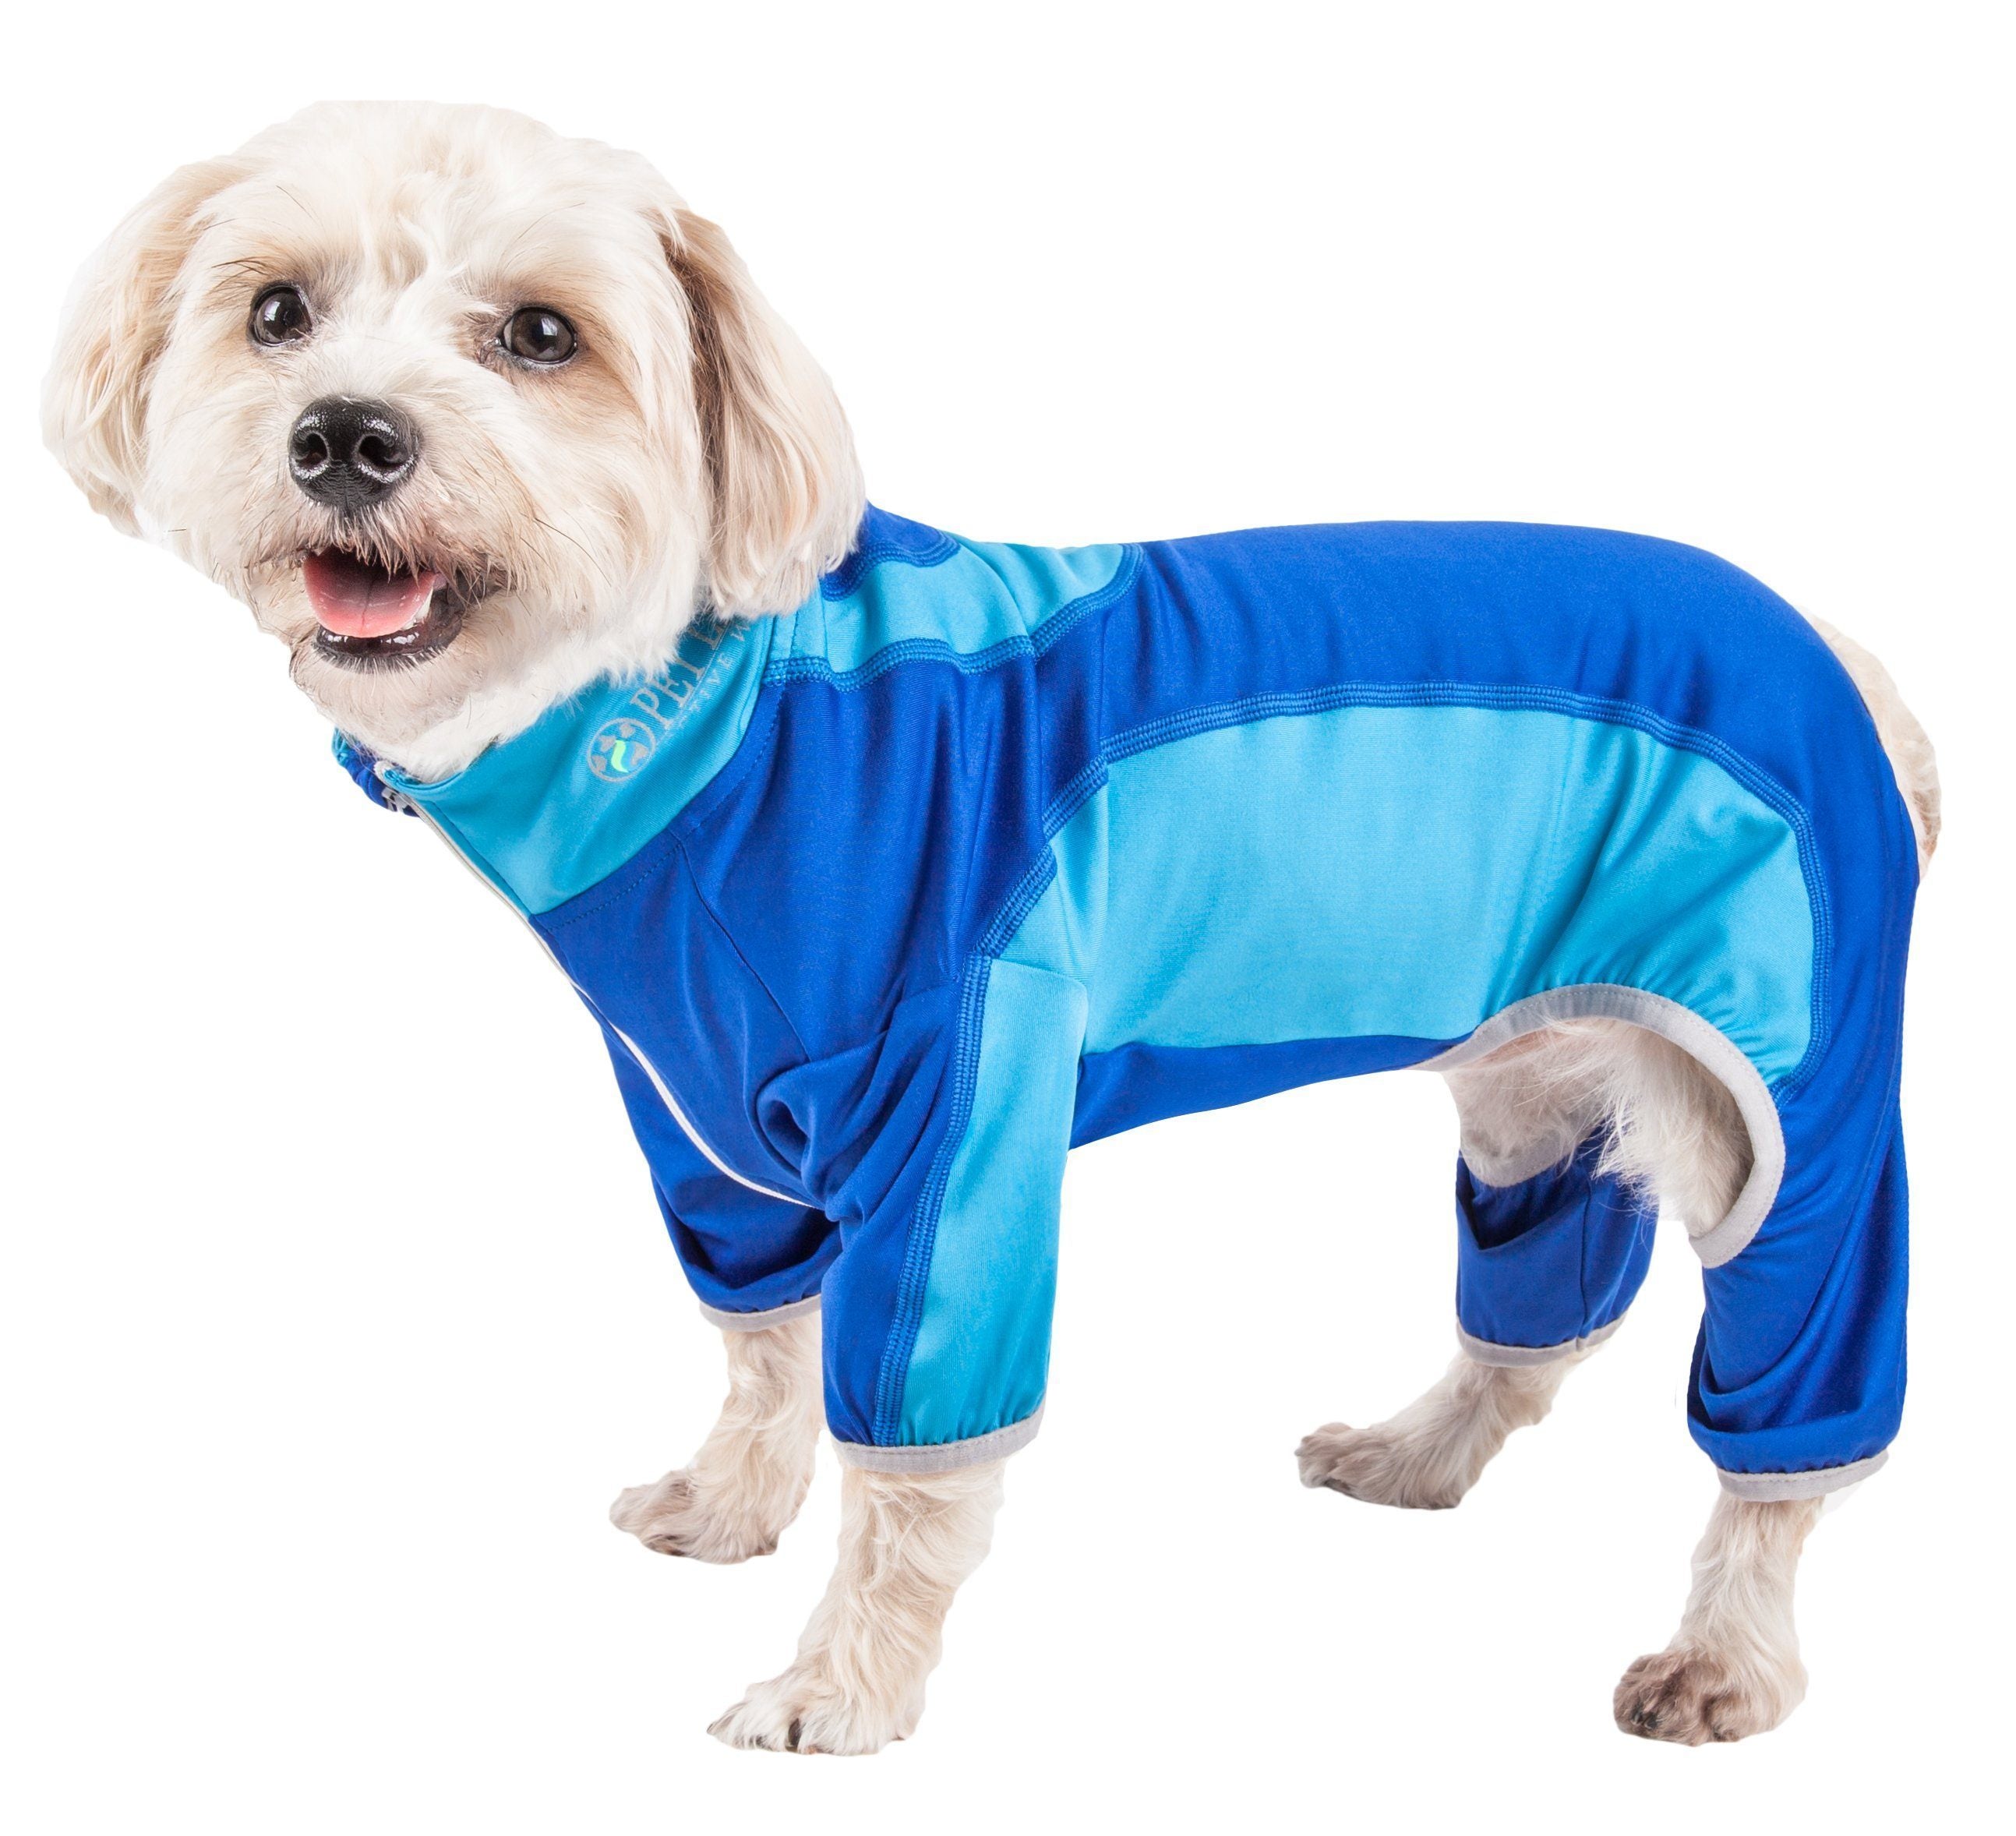 Pet Life ® Active 'Warm-Pup' Stretchy and Quick-Drying Fitness Dog Yoga Warm-Up Tracksuit X-Small Dark Blue / Light Blue